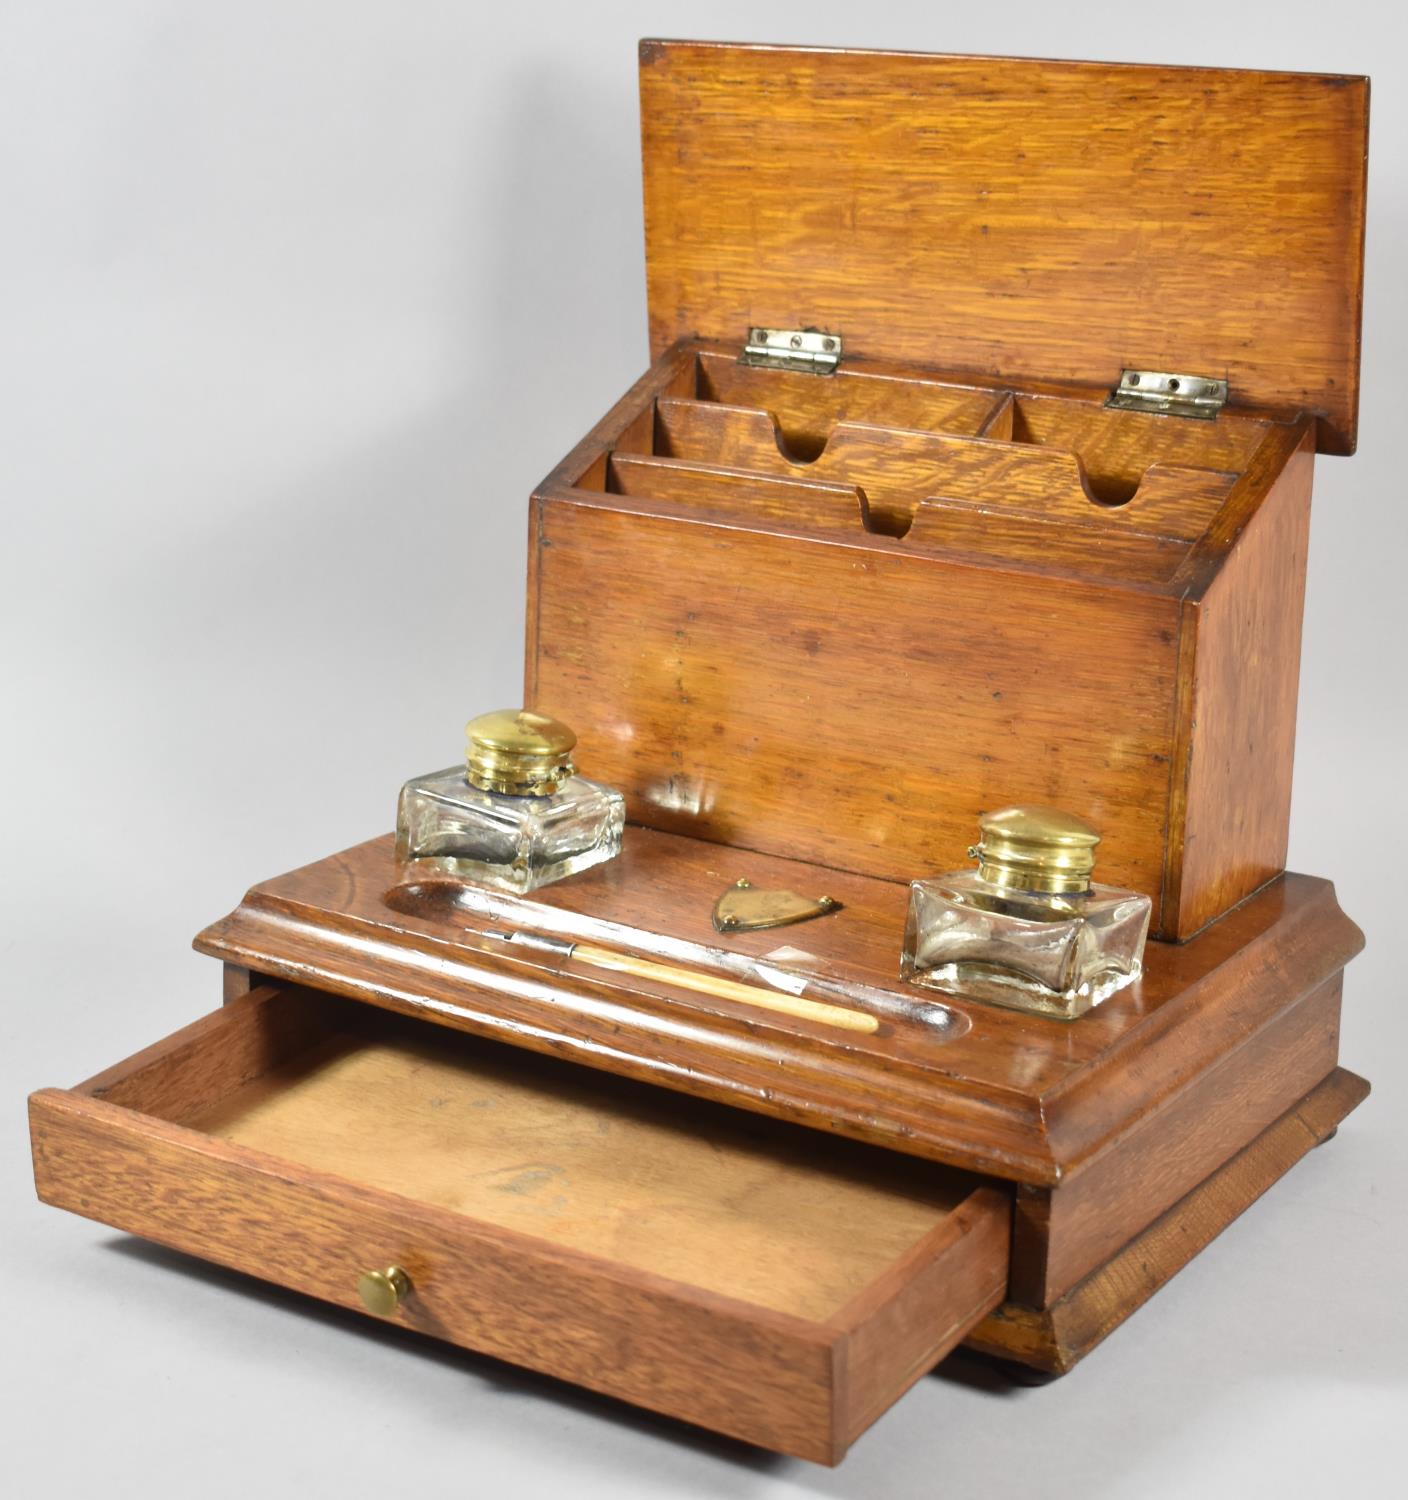 An Edwardian Mahogany Desk Top Stationery Box with Base Drawer, Two Inkwells and Pen Tray, Hinged - Image 2 of 2